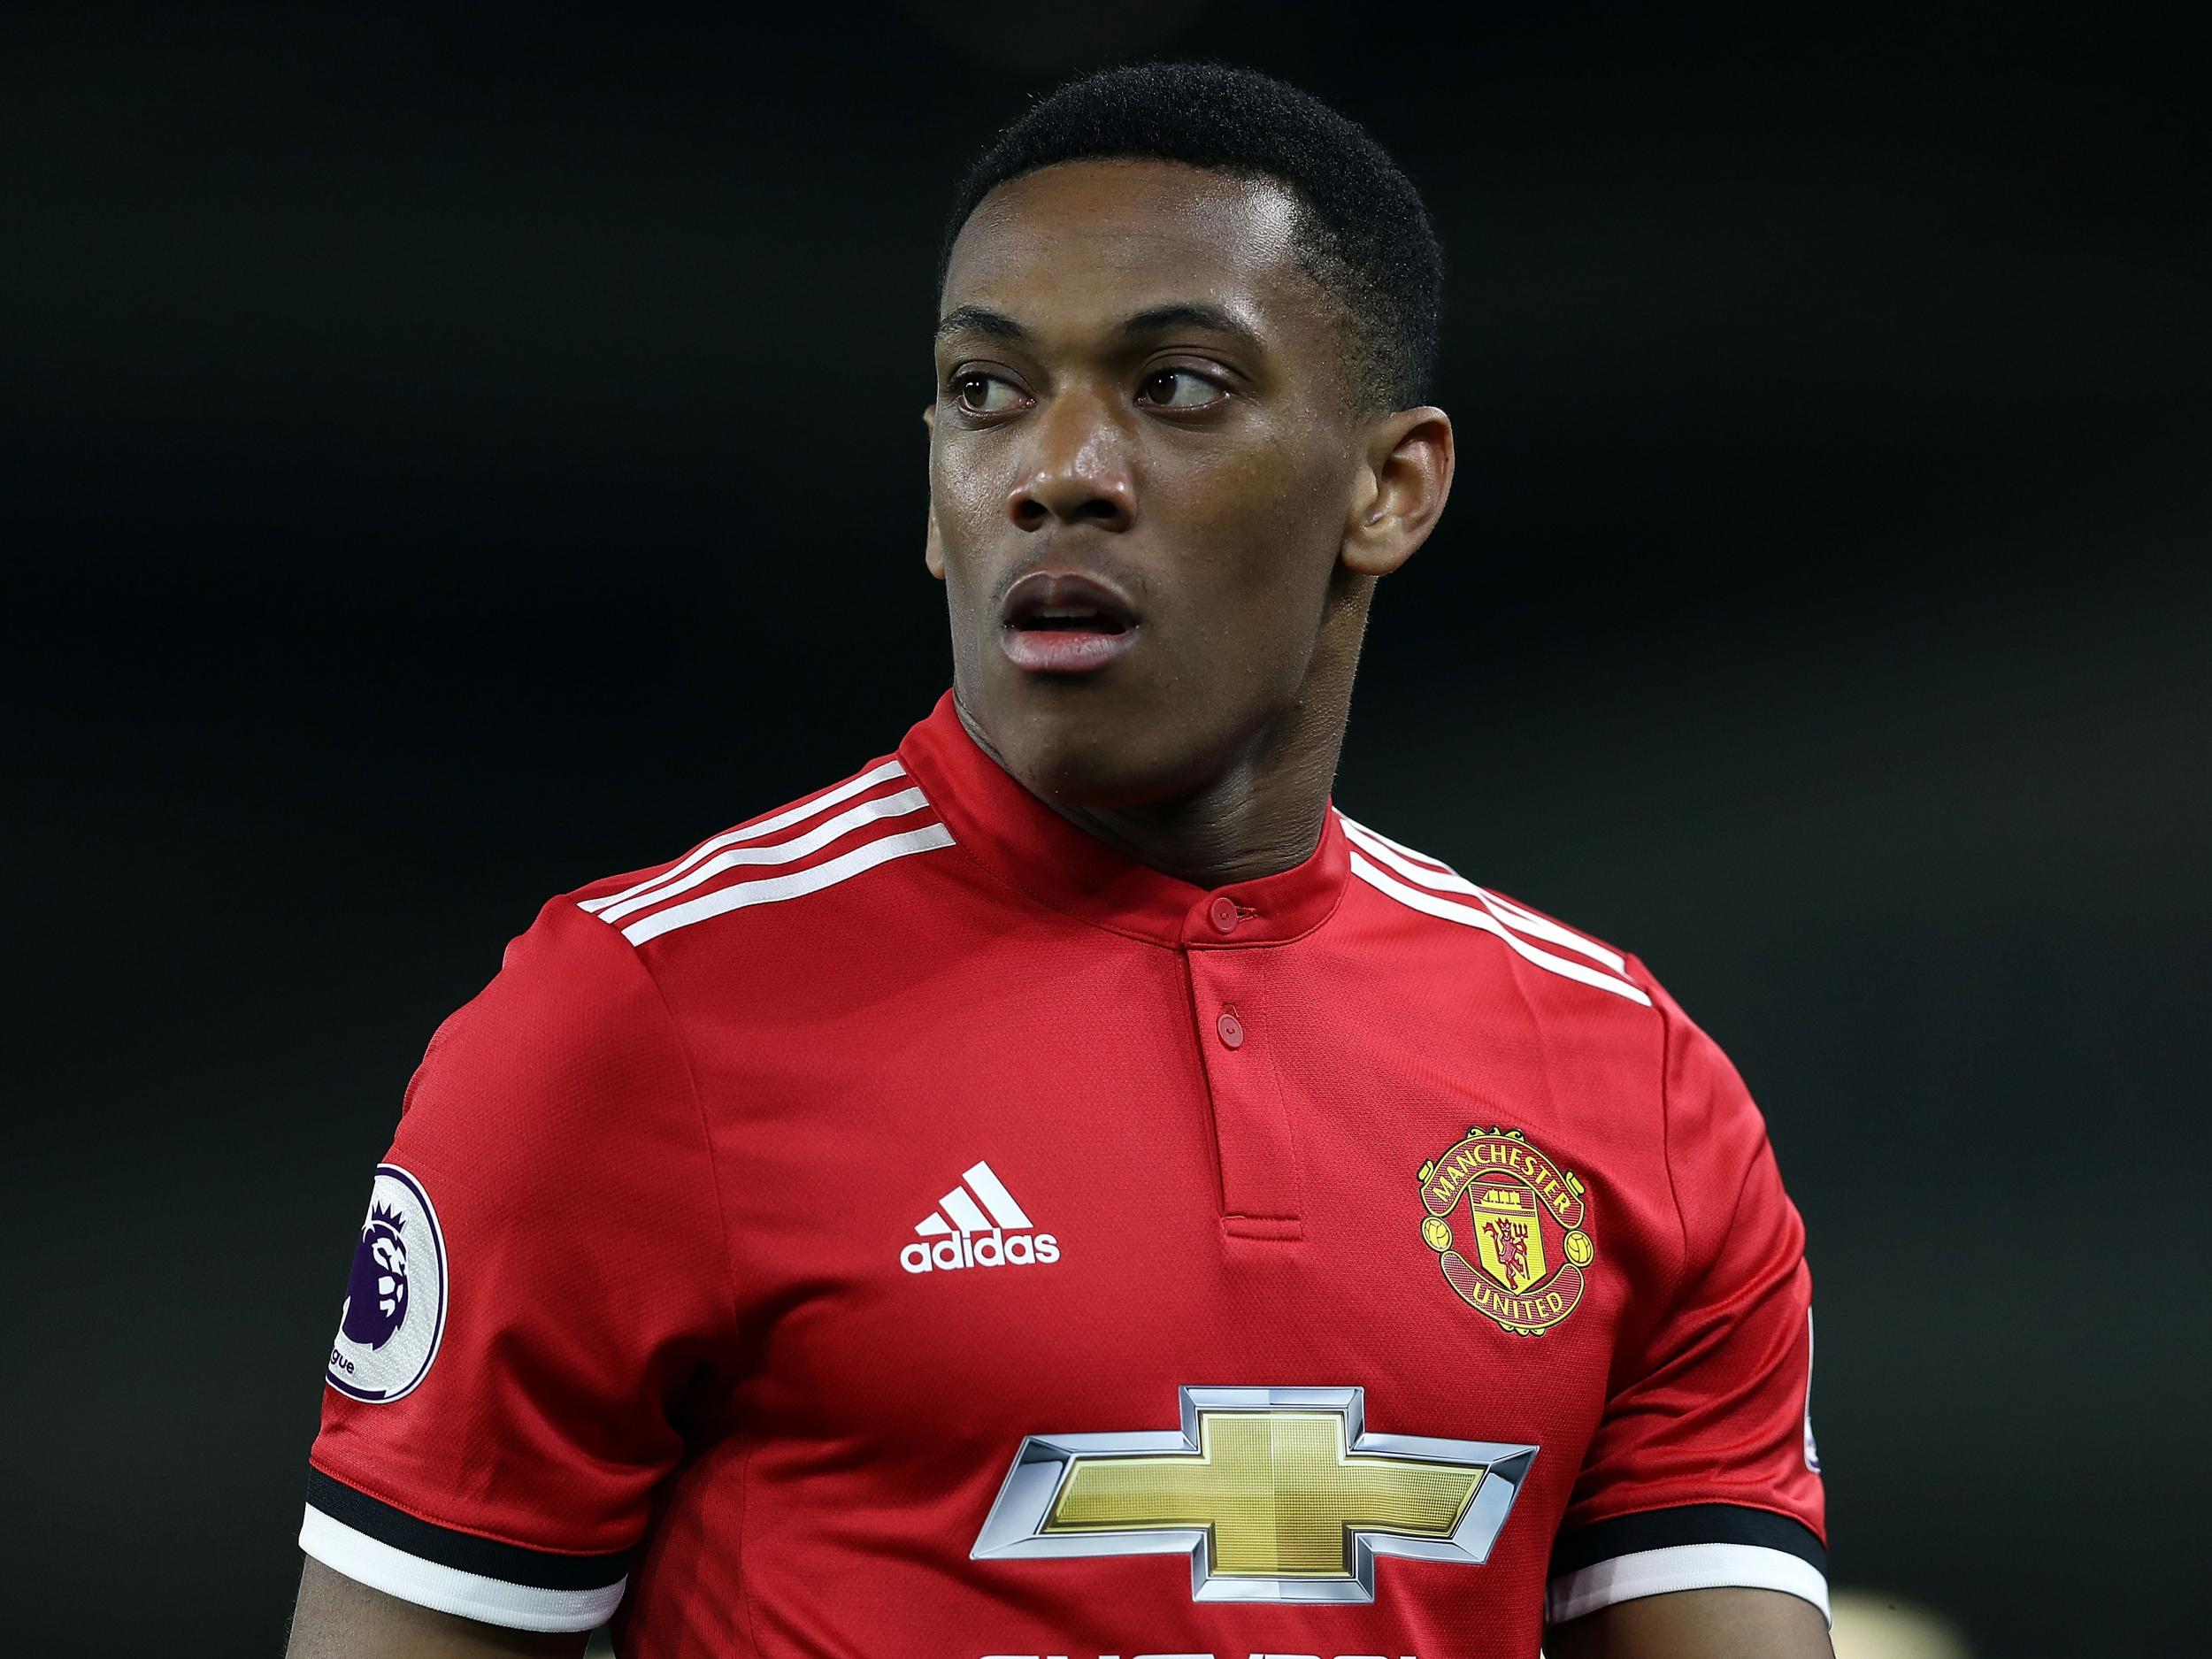 Manchester United forward Anthony Martial wants to leave Old Trafford this summer, confirms agent